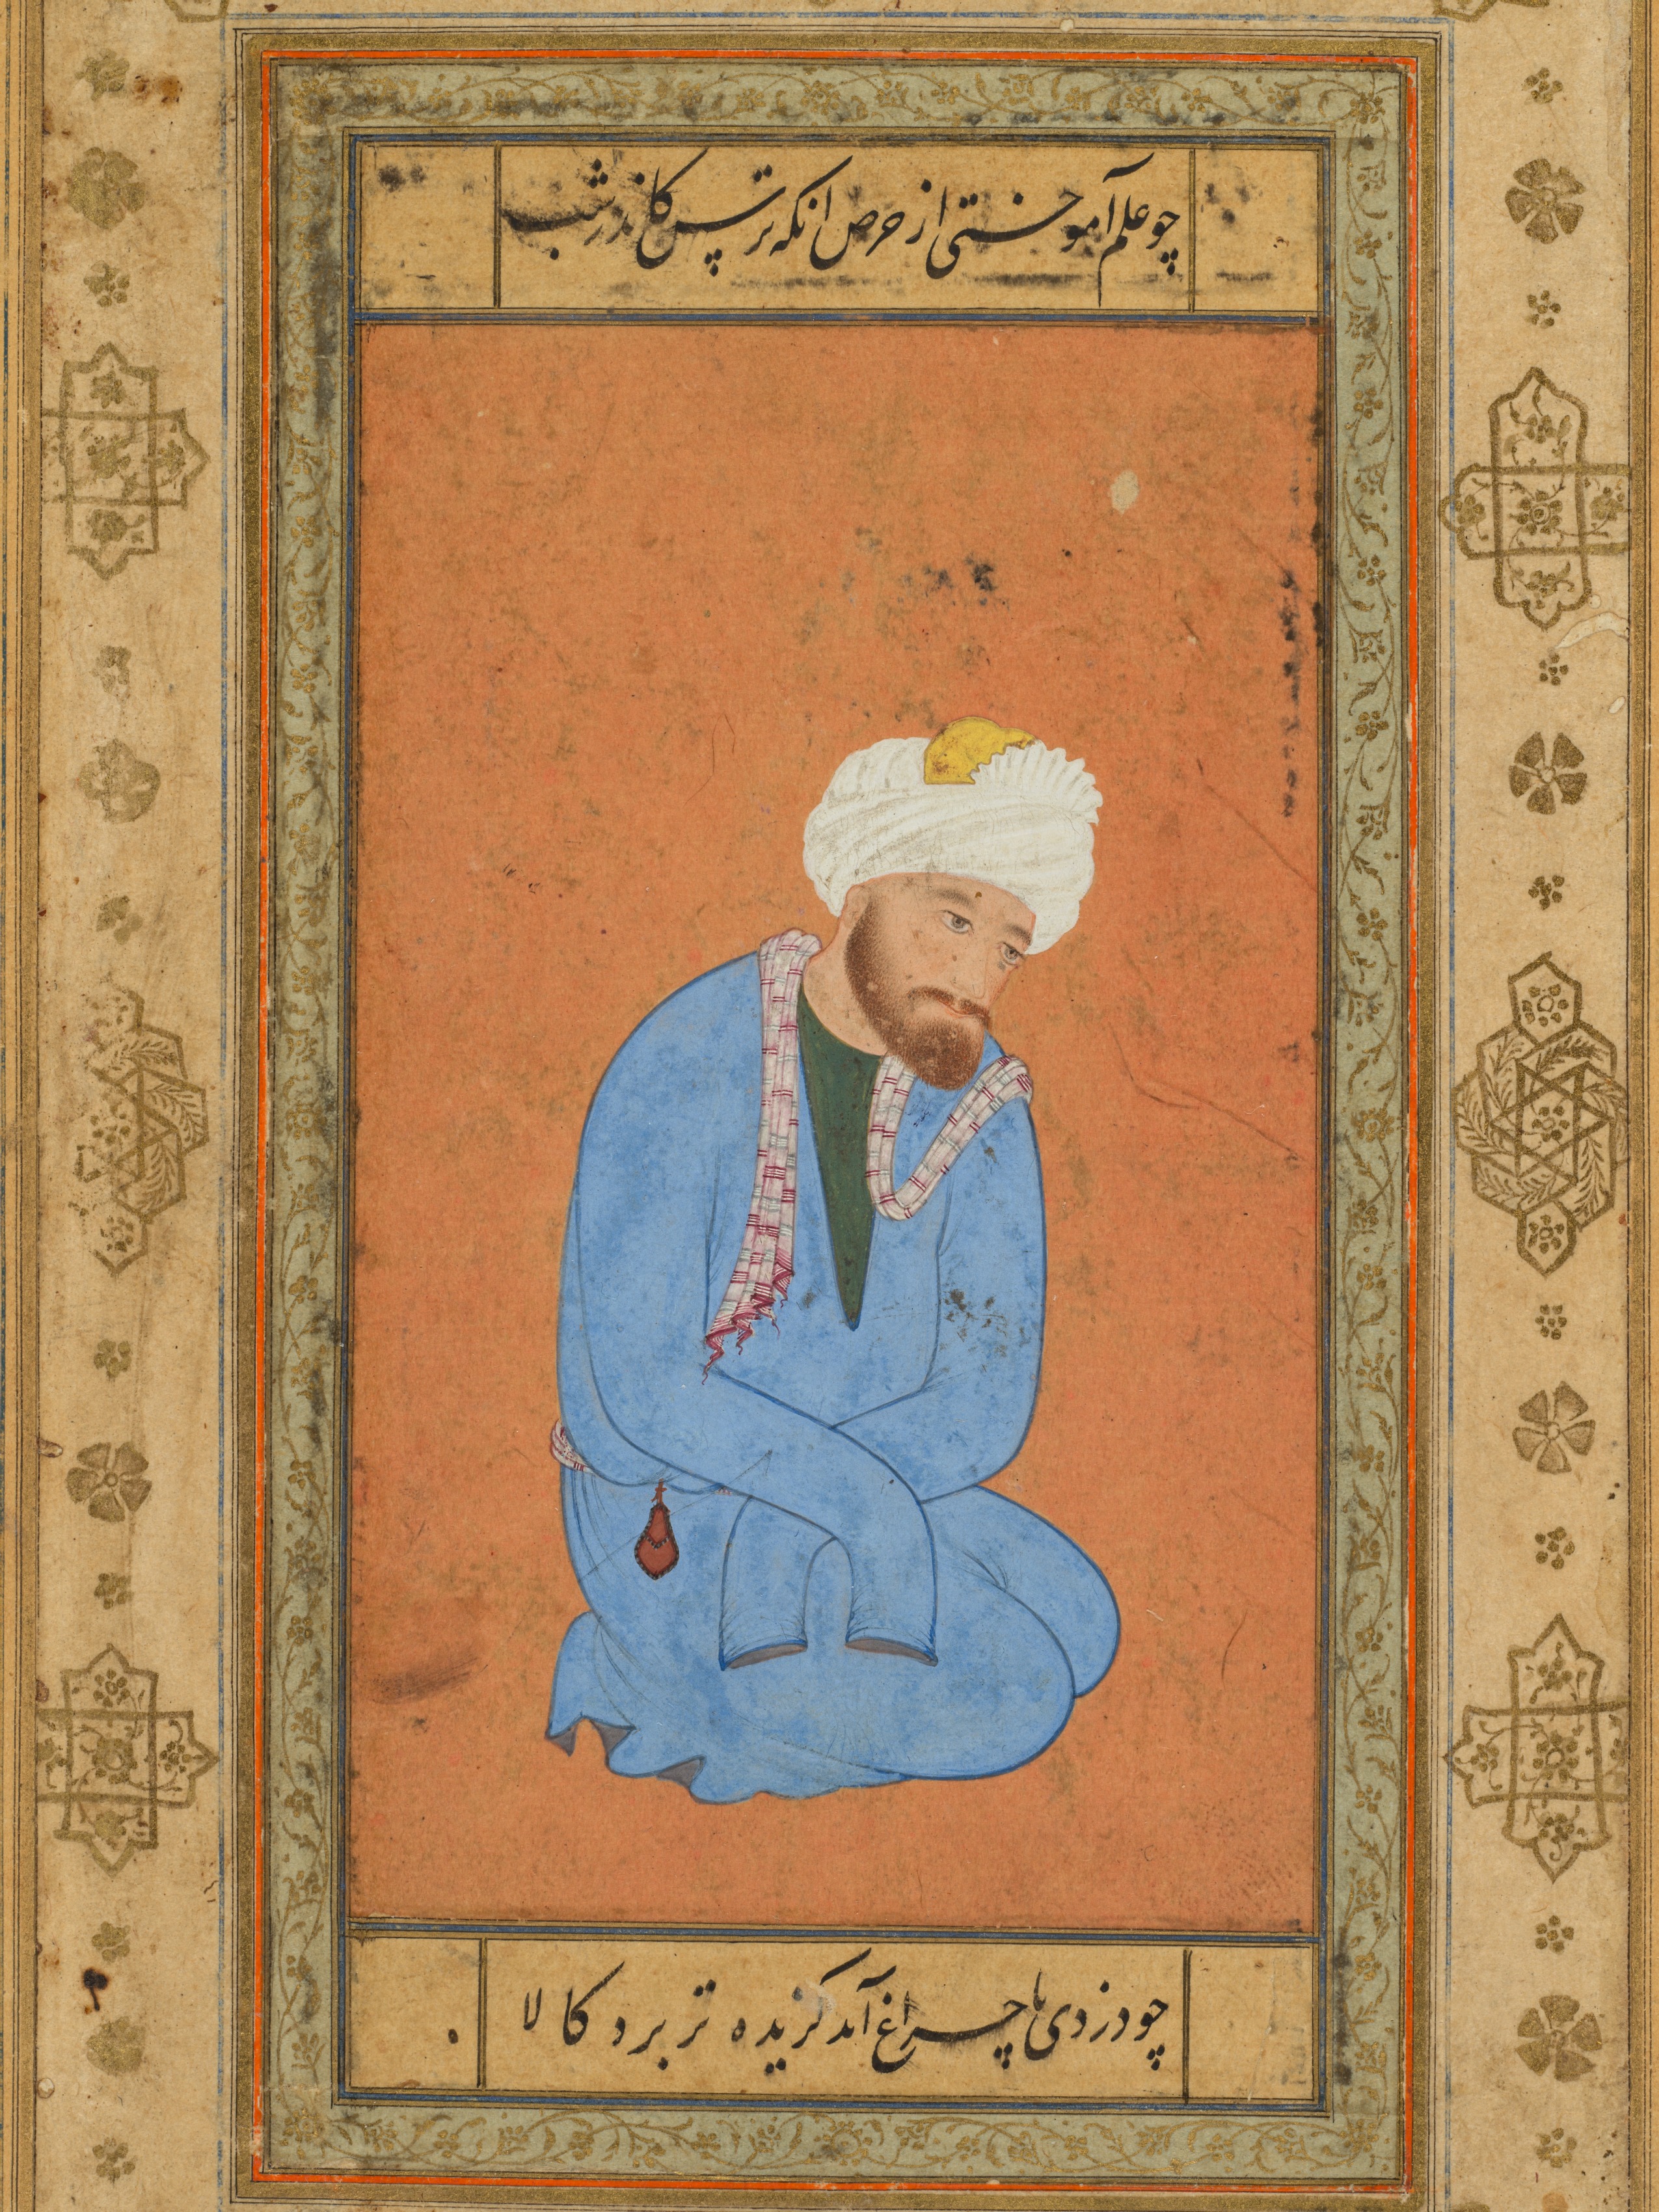 Portrait of a kneeling holy man, from the Prince Salim Album